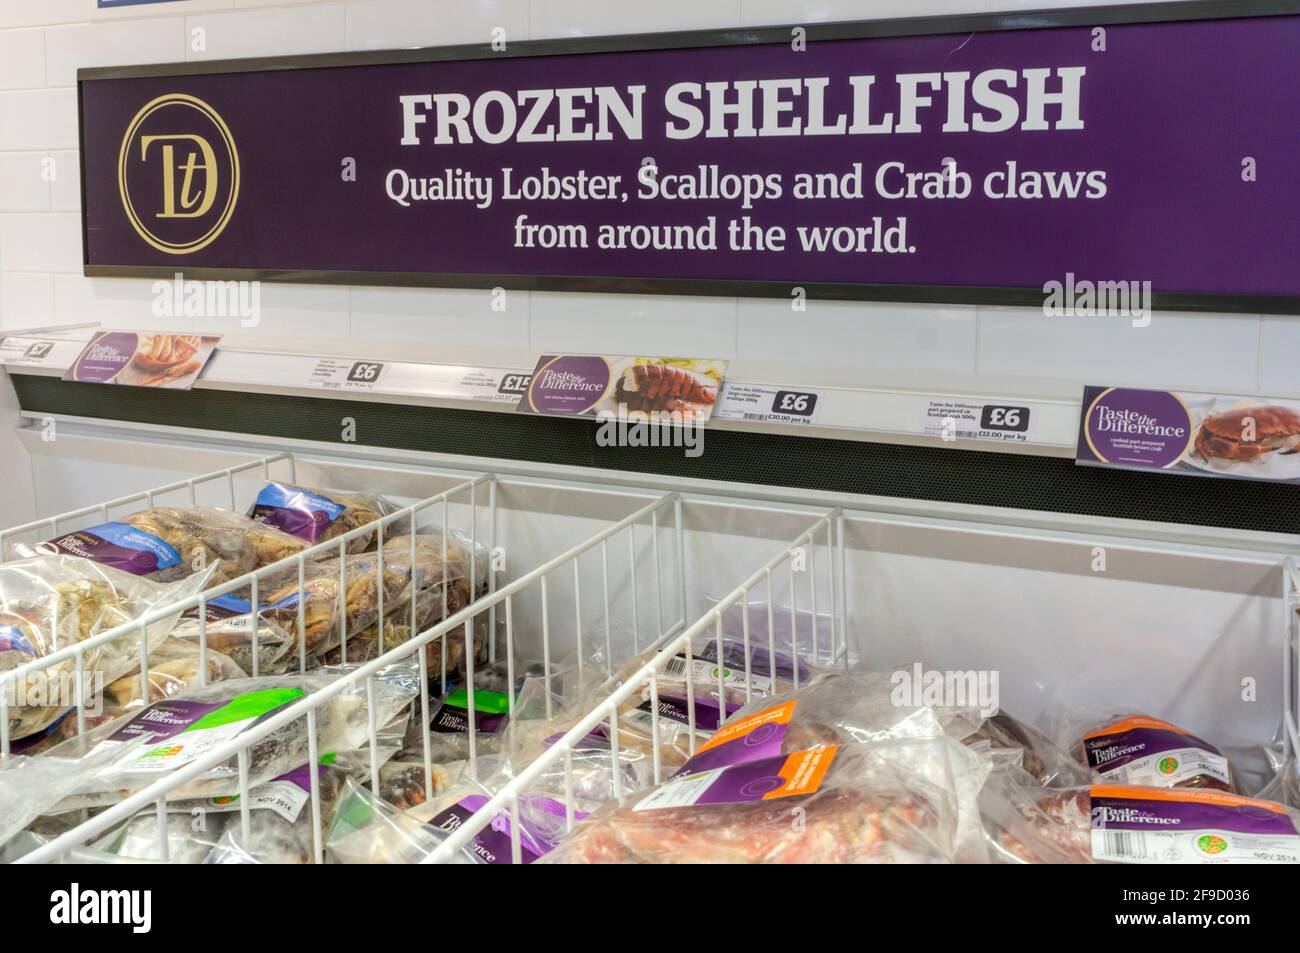 Sign promoting Sainsbury's Taste the Difference branded frozen shellfish from around the world. Stock Photo